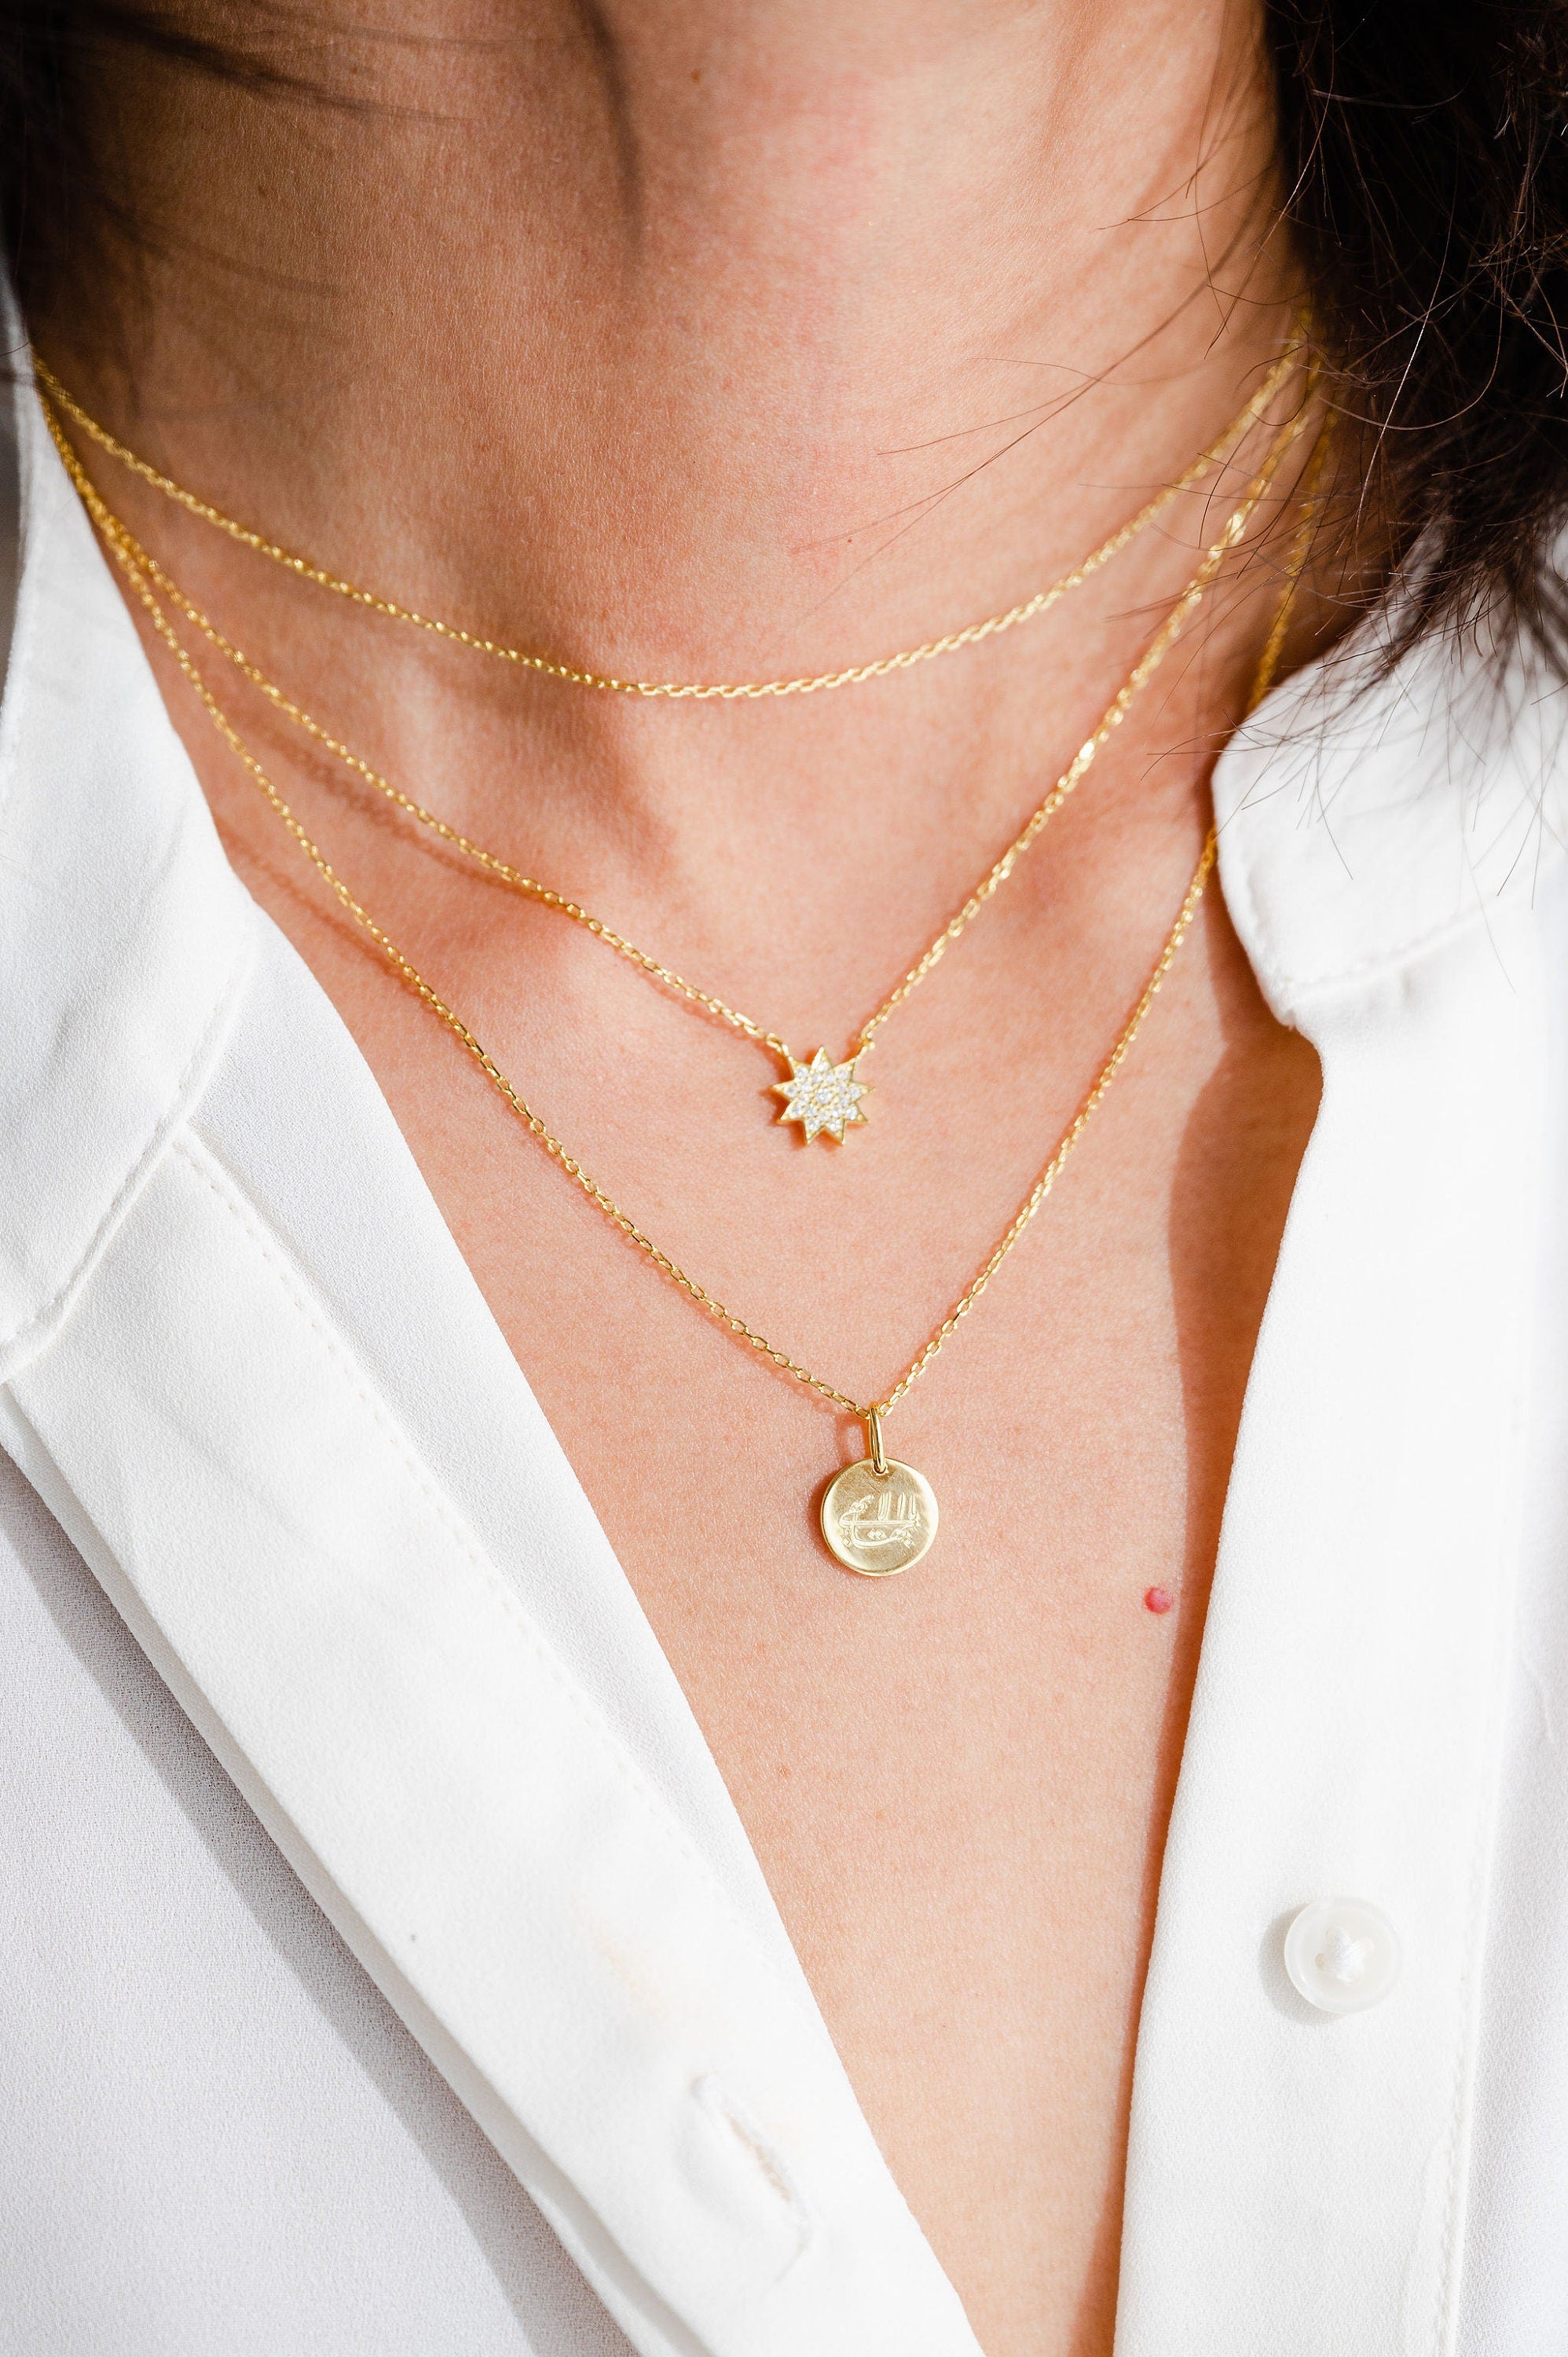 Simple Sparkle Star Necklace, Gold Necklace, Pendant, Dainty Gold